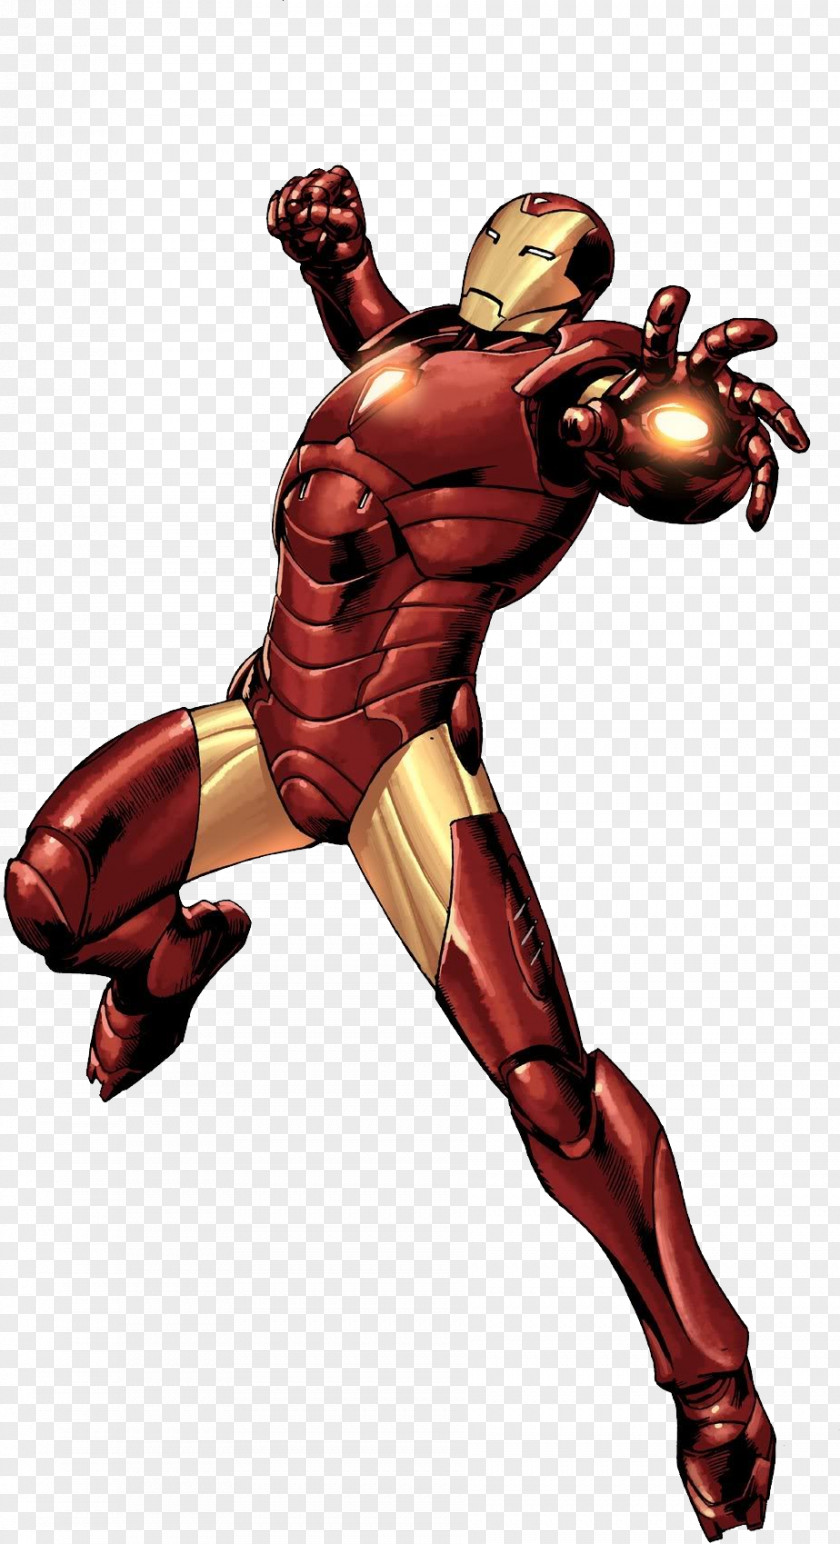 Iron Man's Armor Extremis Black Panther Wikia PNG